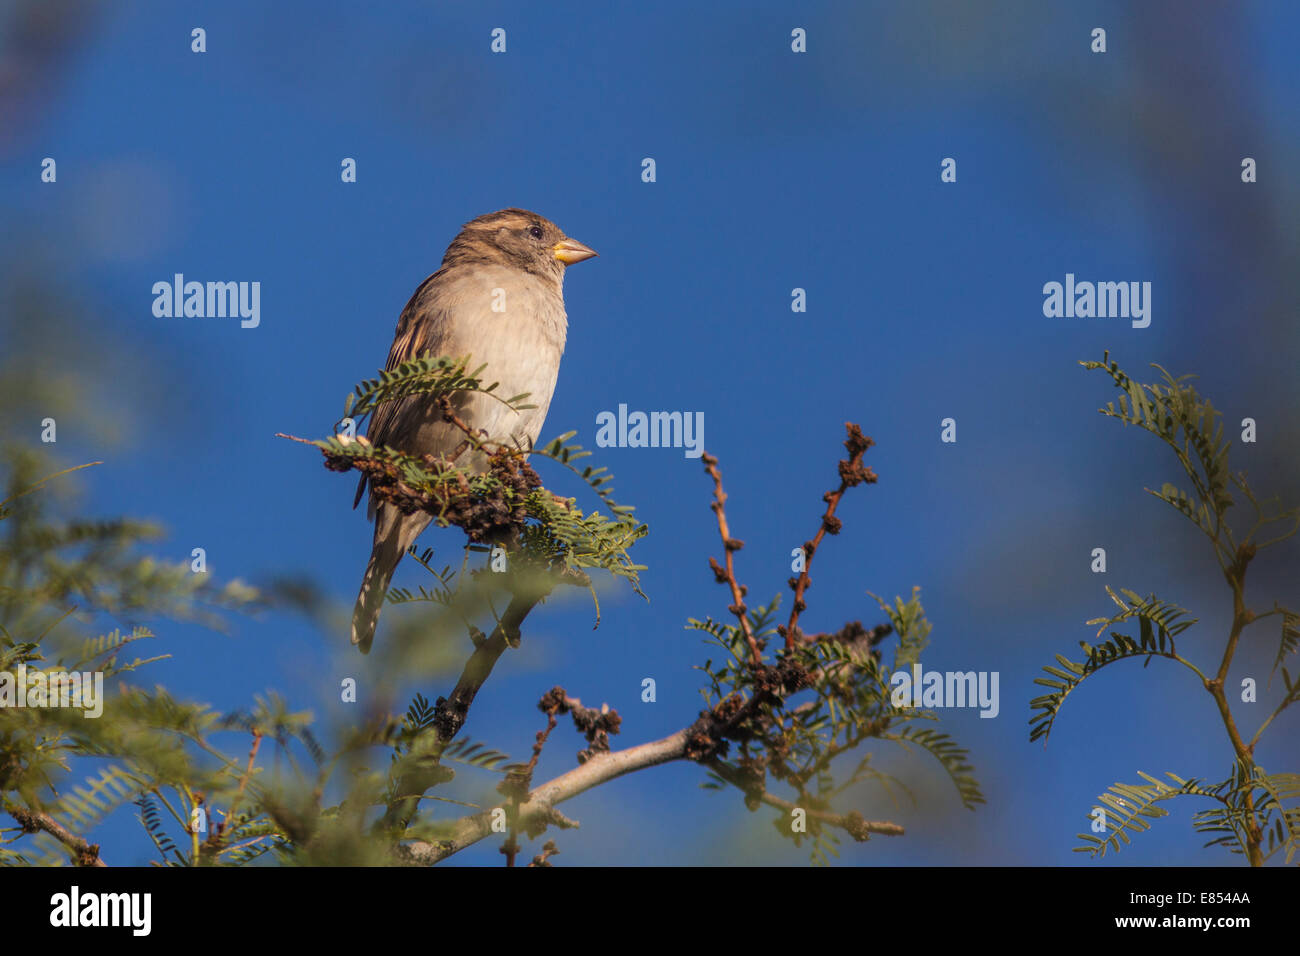 Femaile House Sparrow in Mesquite tree at Panther Junction in Big Bend National Park. Stock Photo